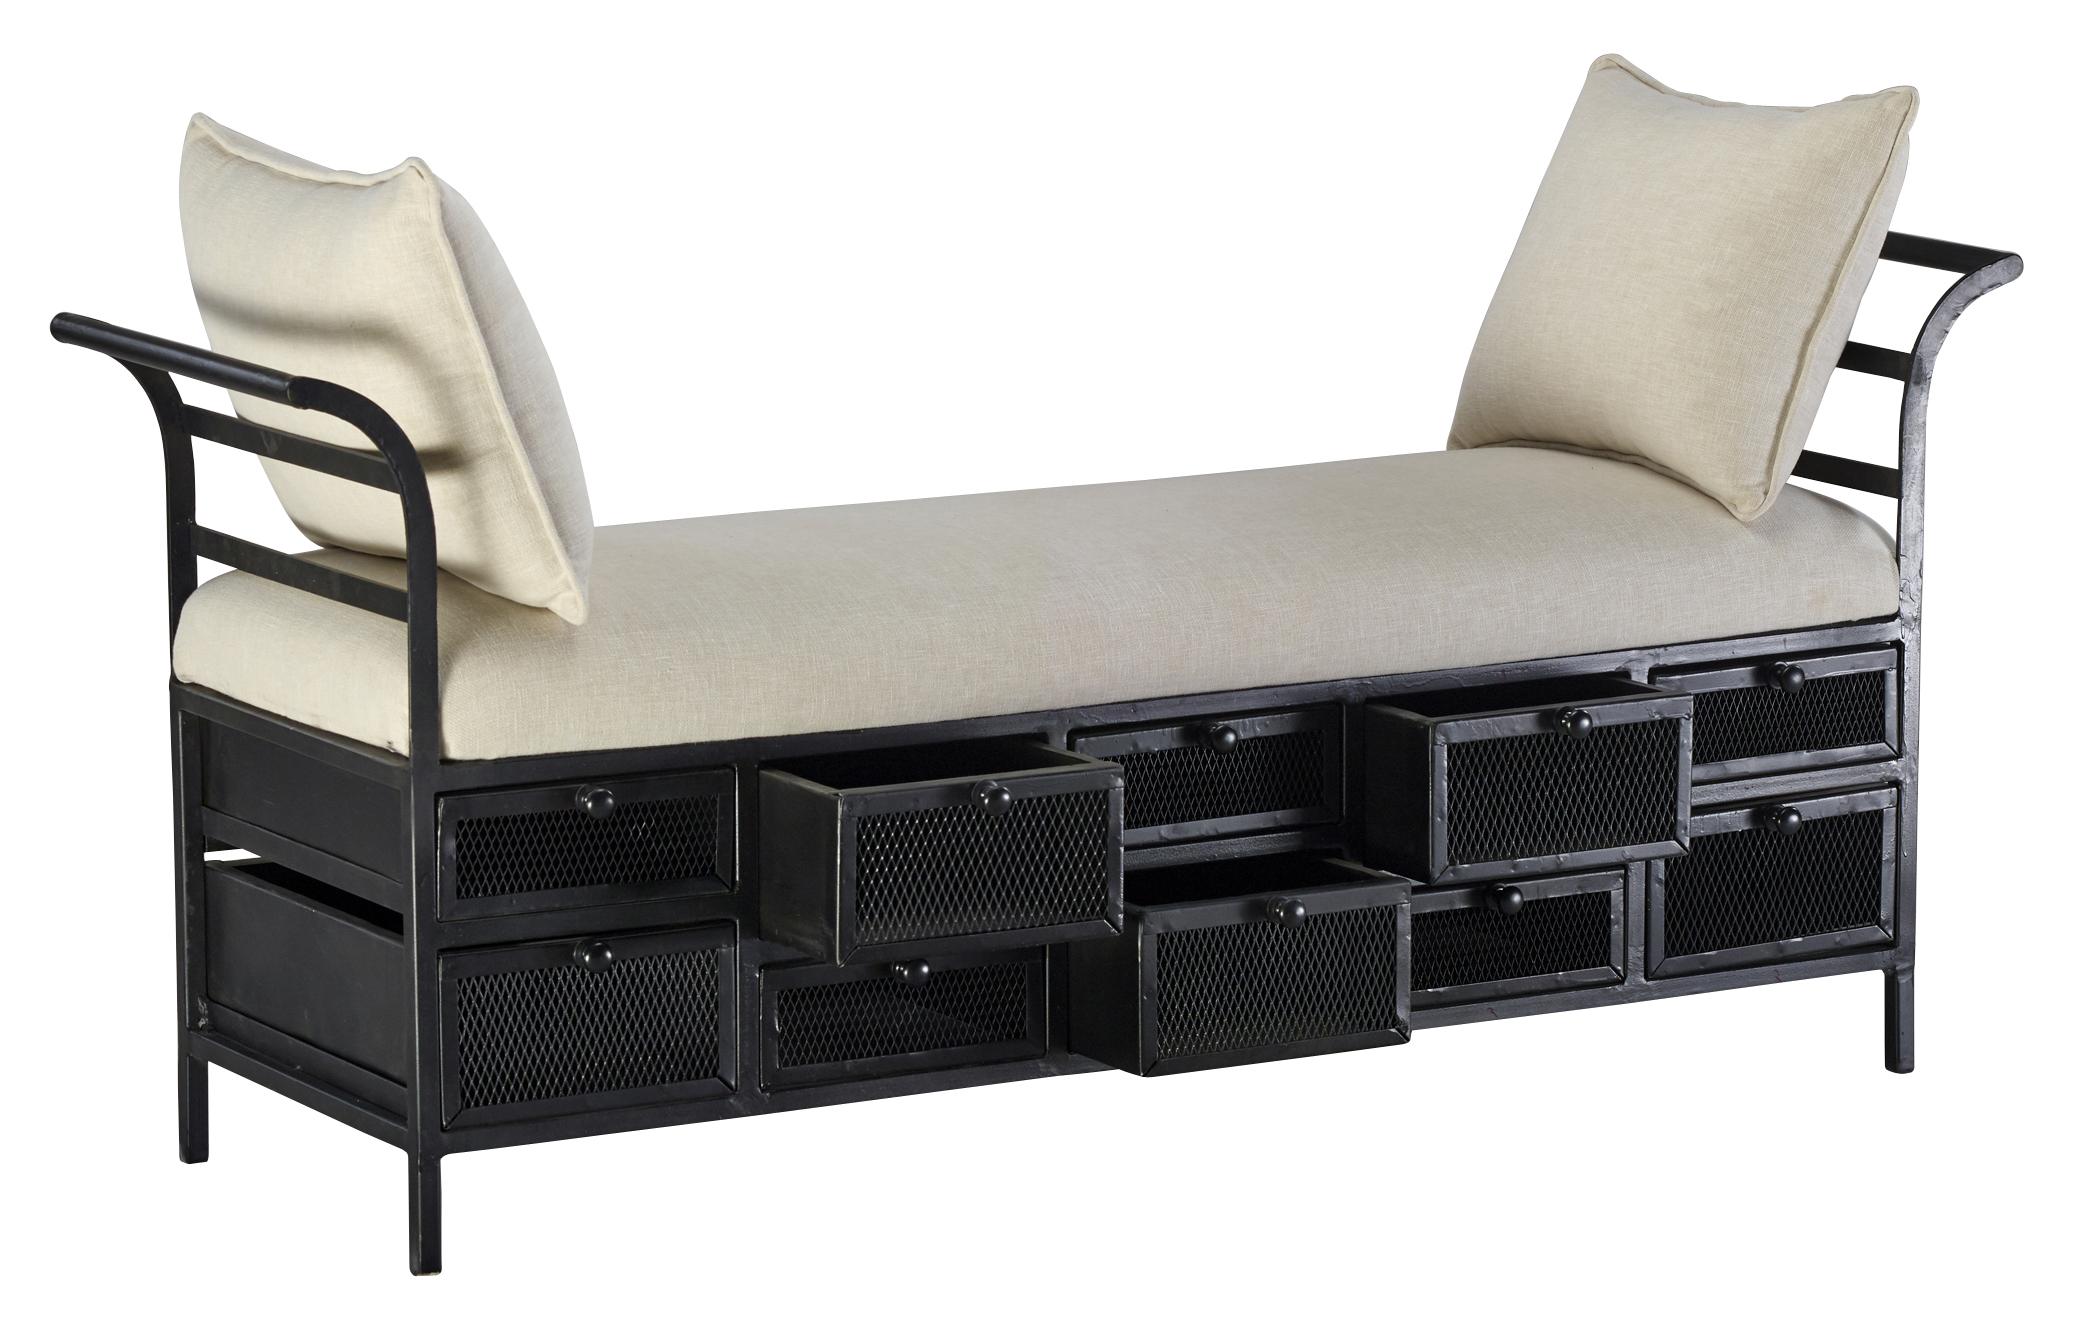 Urban Benches CAC-4554 CAC-4554 in Black, Beige Fabric